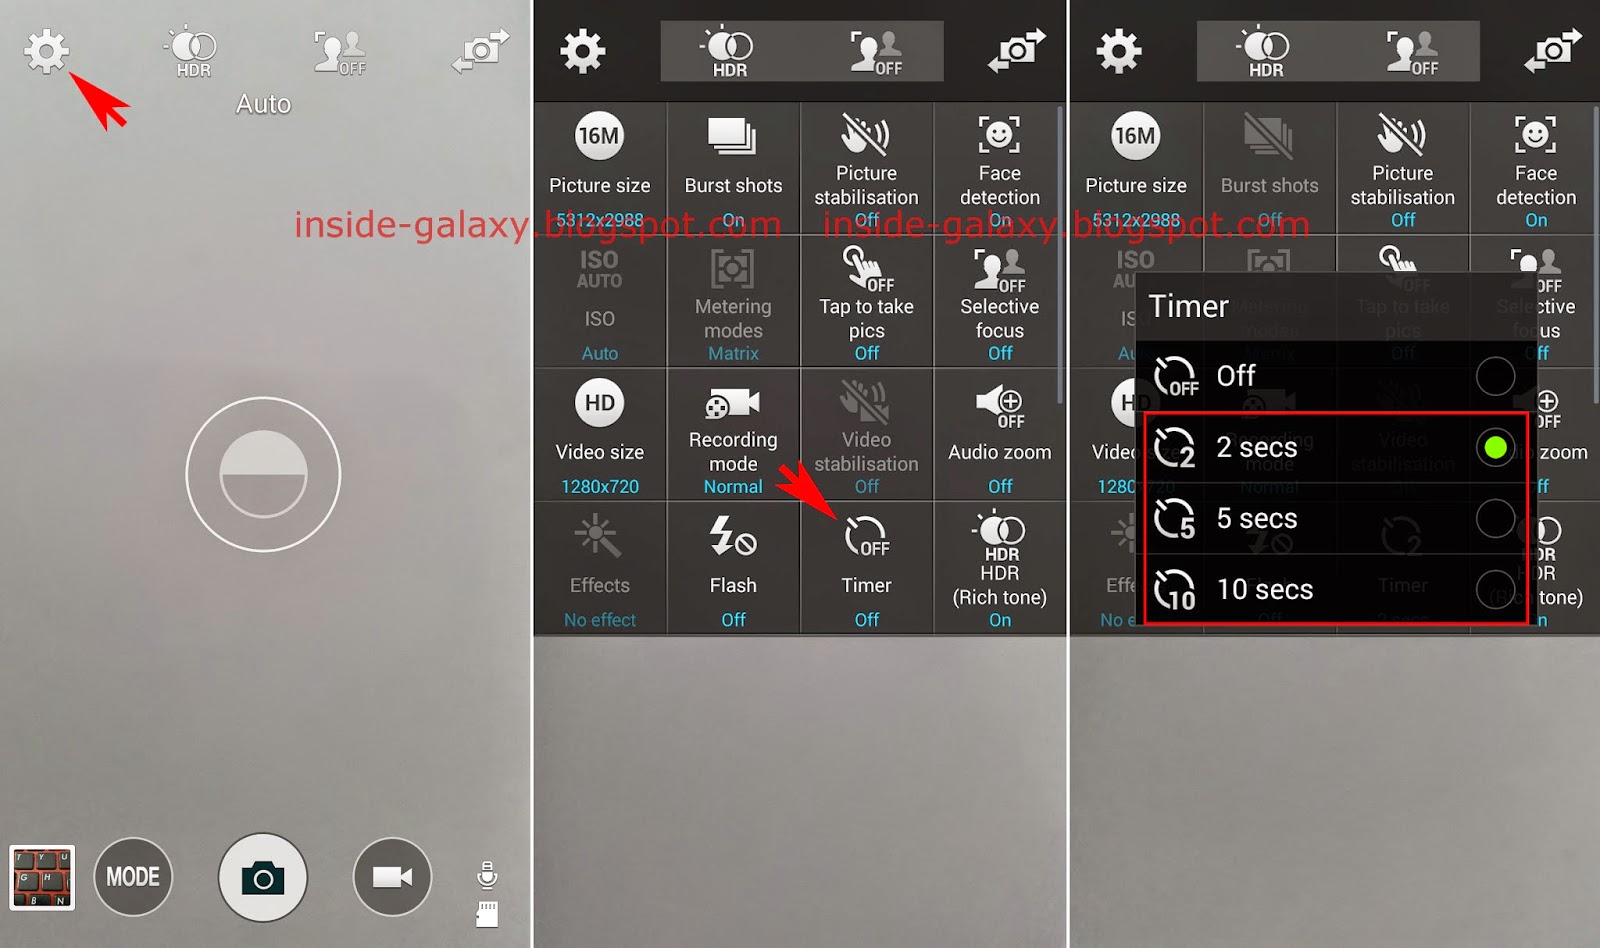 Inside Galaxy: Samsung Galaxy S5: How to Adjust the Delay Timer in the Stock Camera in Android 4.4.2 Kitkat